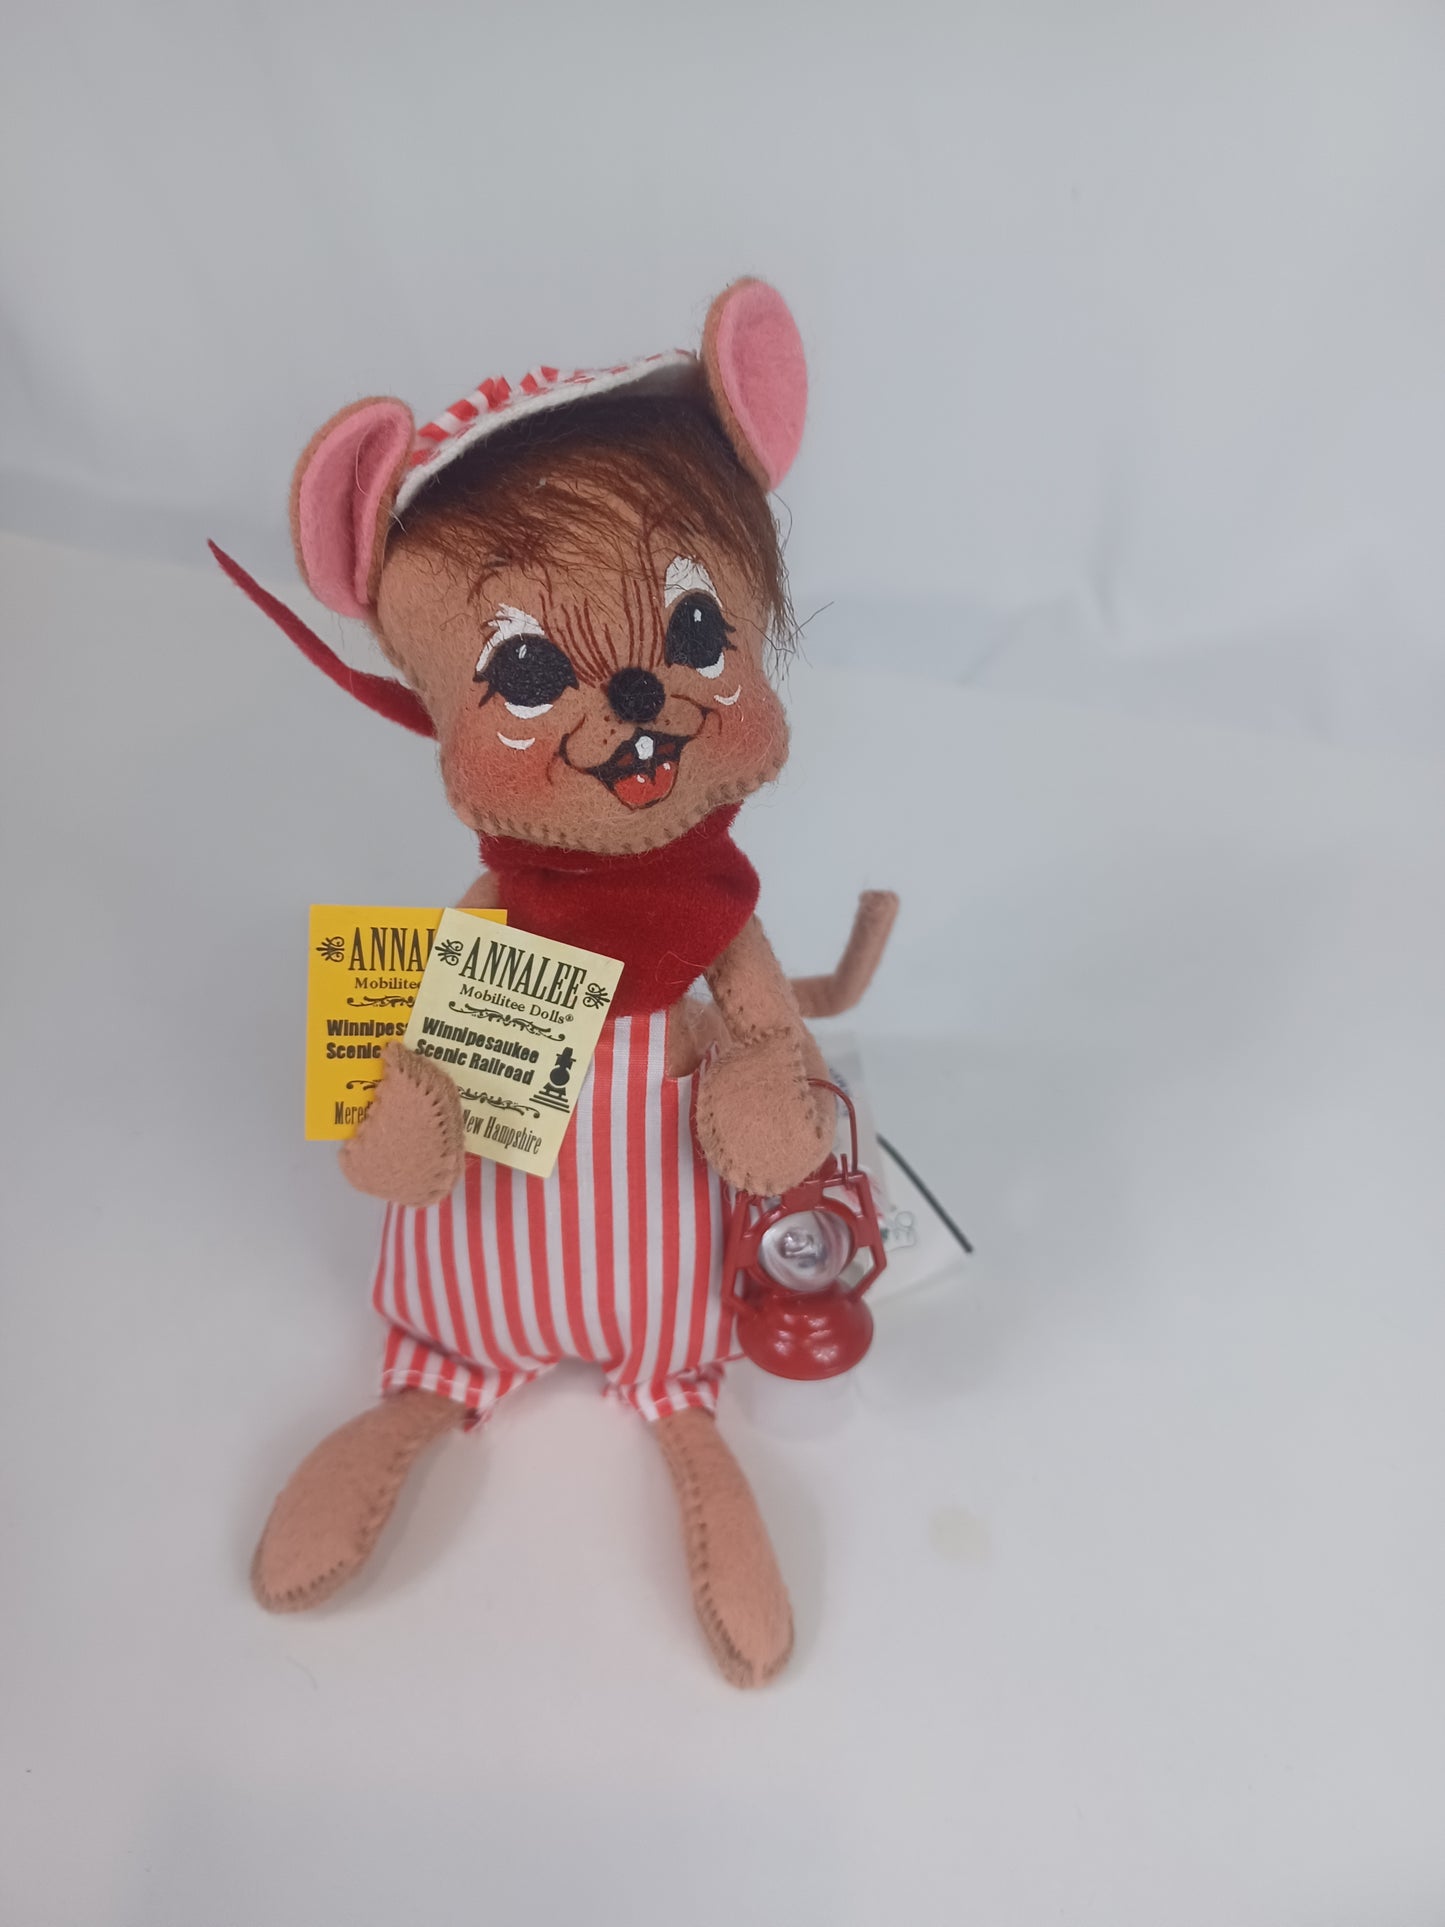 7" Train Engineer Mouse - Signed 973301 Annalee